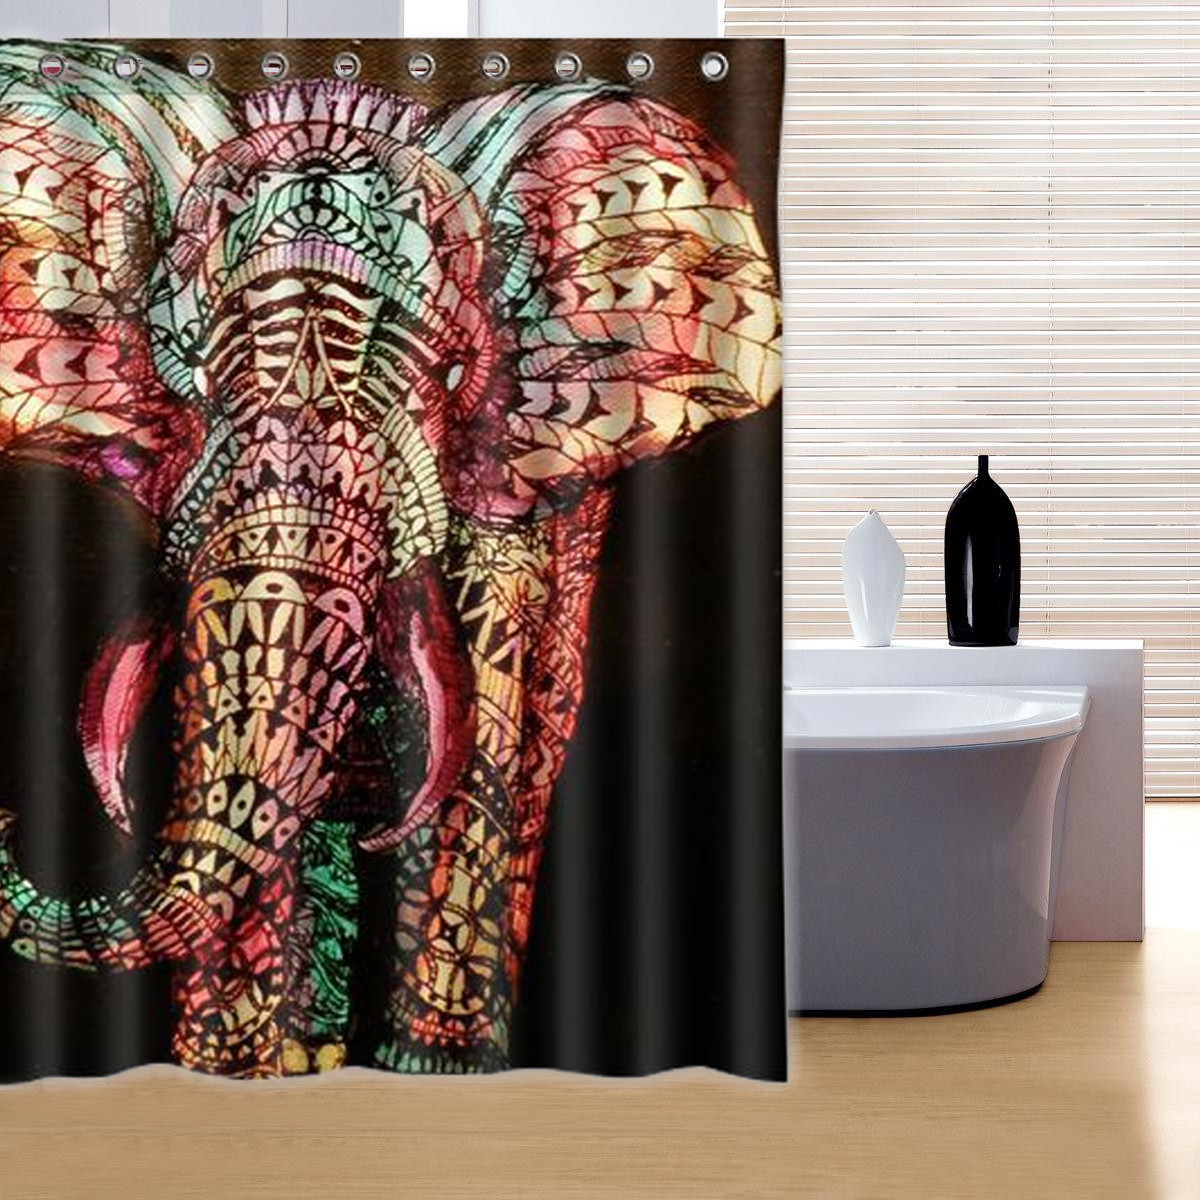 Animal Elephant Fabric Shower Curtain Decor with 12 Hooks Waterproof 71"x71" In 